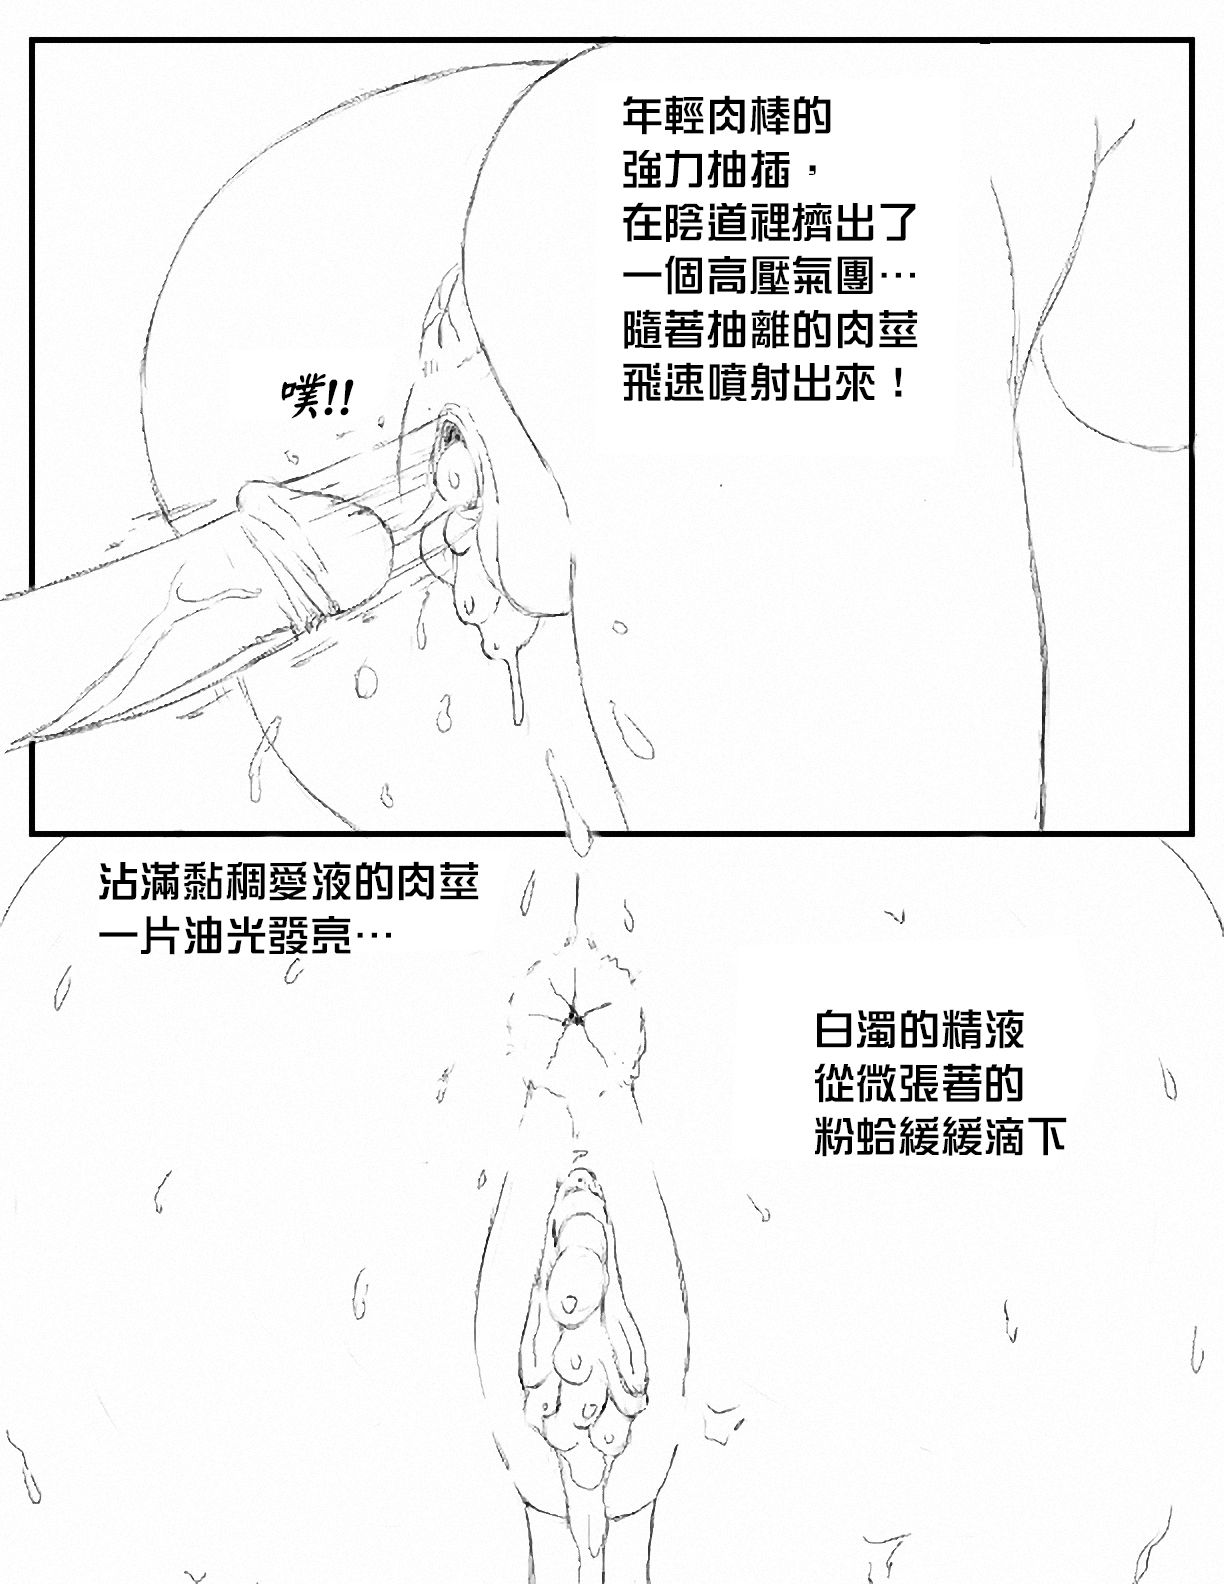 [b4p] A Son's Fixation chapter 1-6 [Chinese] [某三人汉化组] [Uncensored] [b4p] A Son's Fixation (兒子的固戀) chapter 1-6 [中国翻訳] [Uncensored]